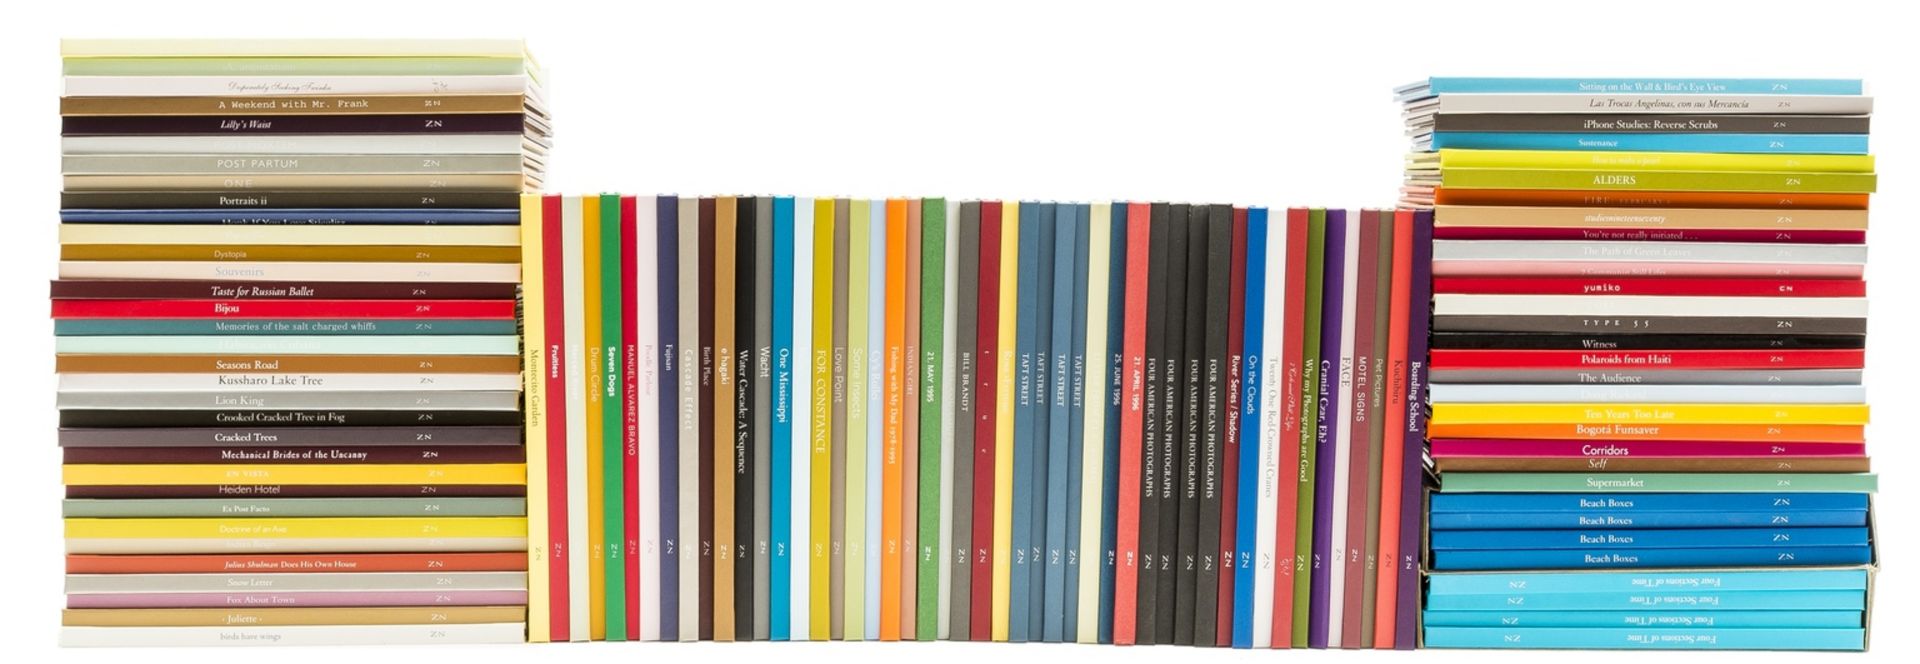 Nazraeli Press.- One Picture Book, Nos.1-100 [a complete set including variants], each one of 500 …